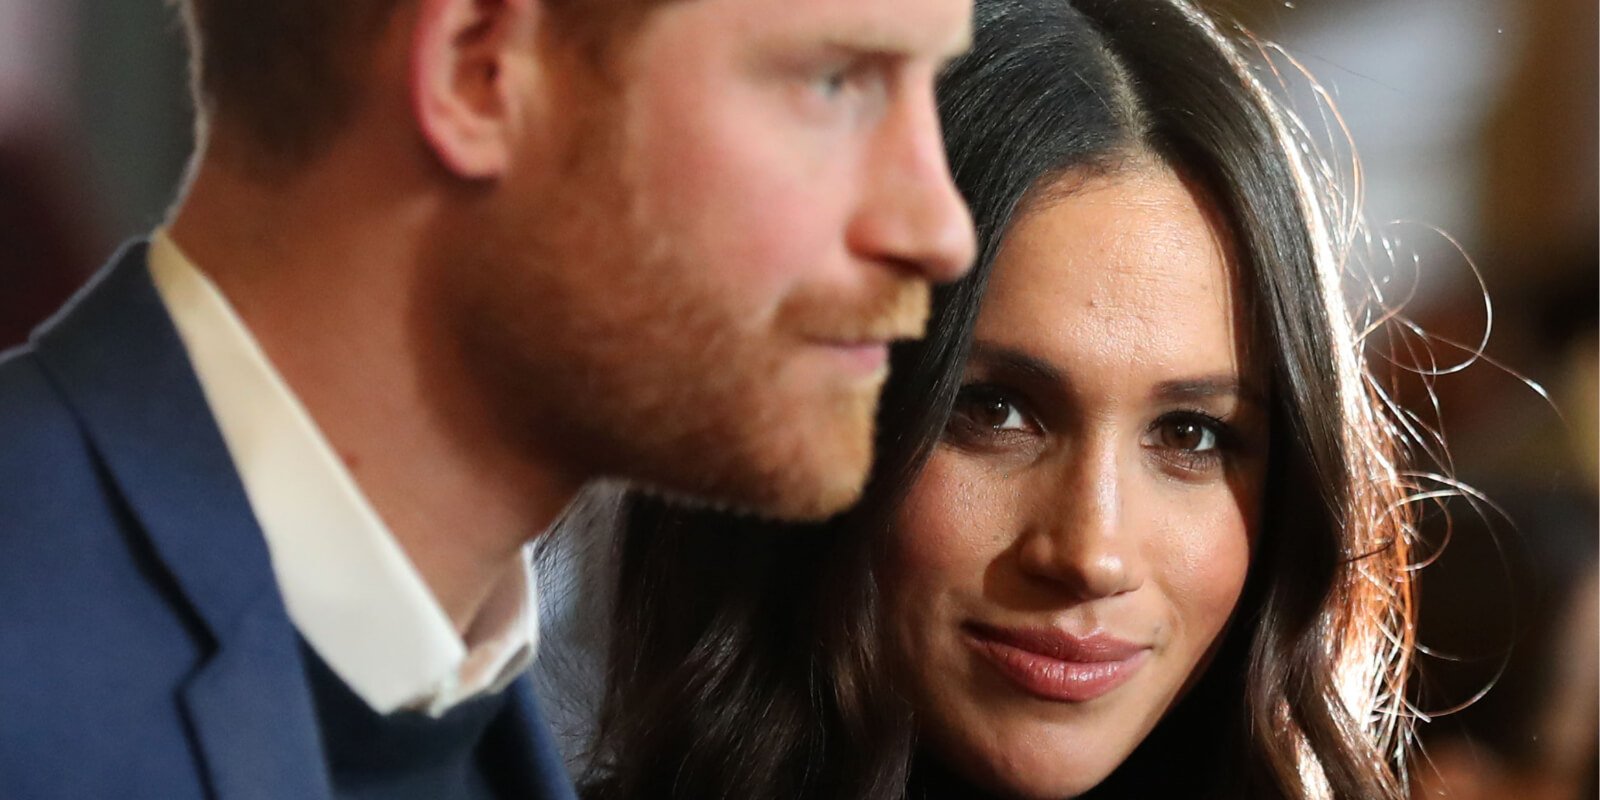 Prince Harry and Meghan Markle at a reception for young people at the Palace of Holyroodhouse on February 13, 2018 in Edinburgh, Scotland.